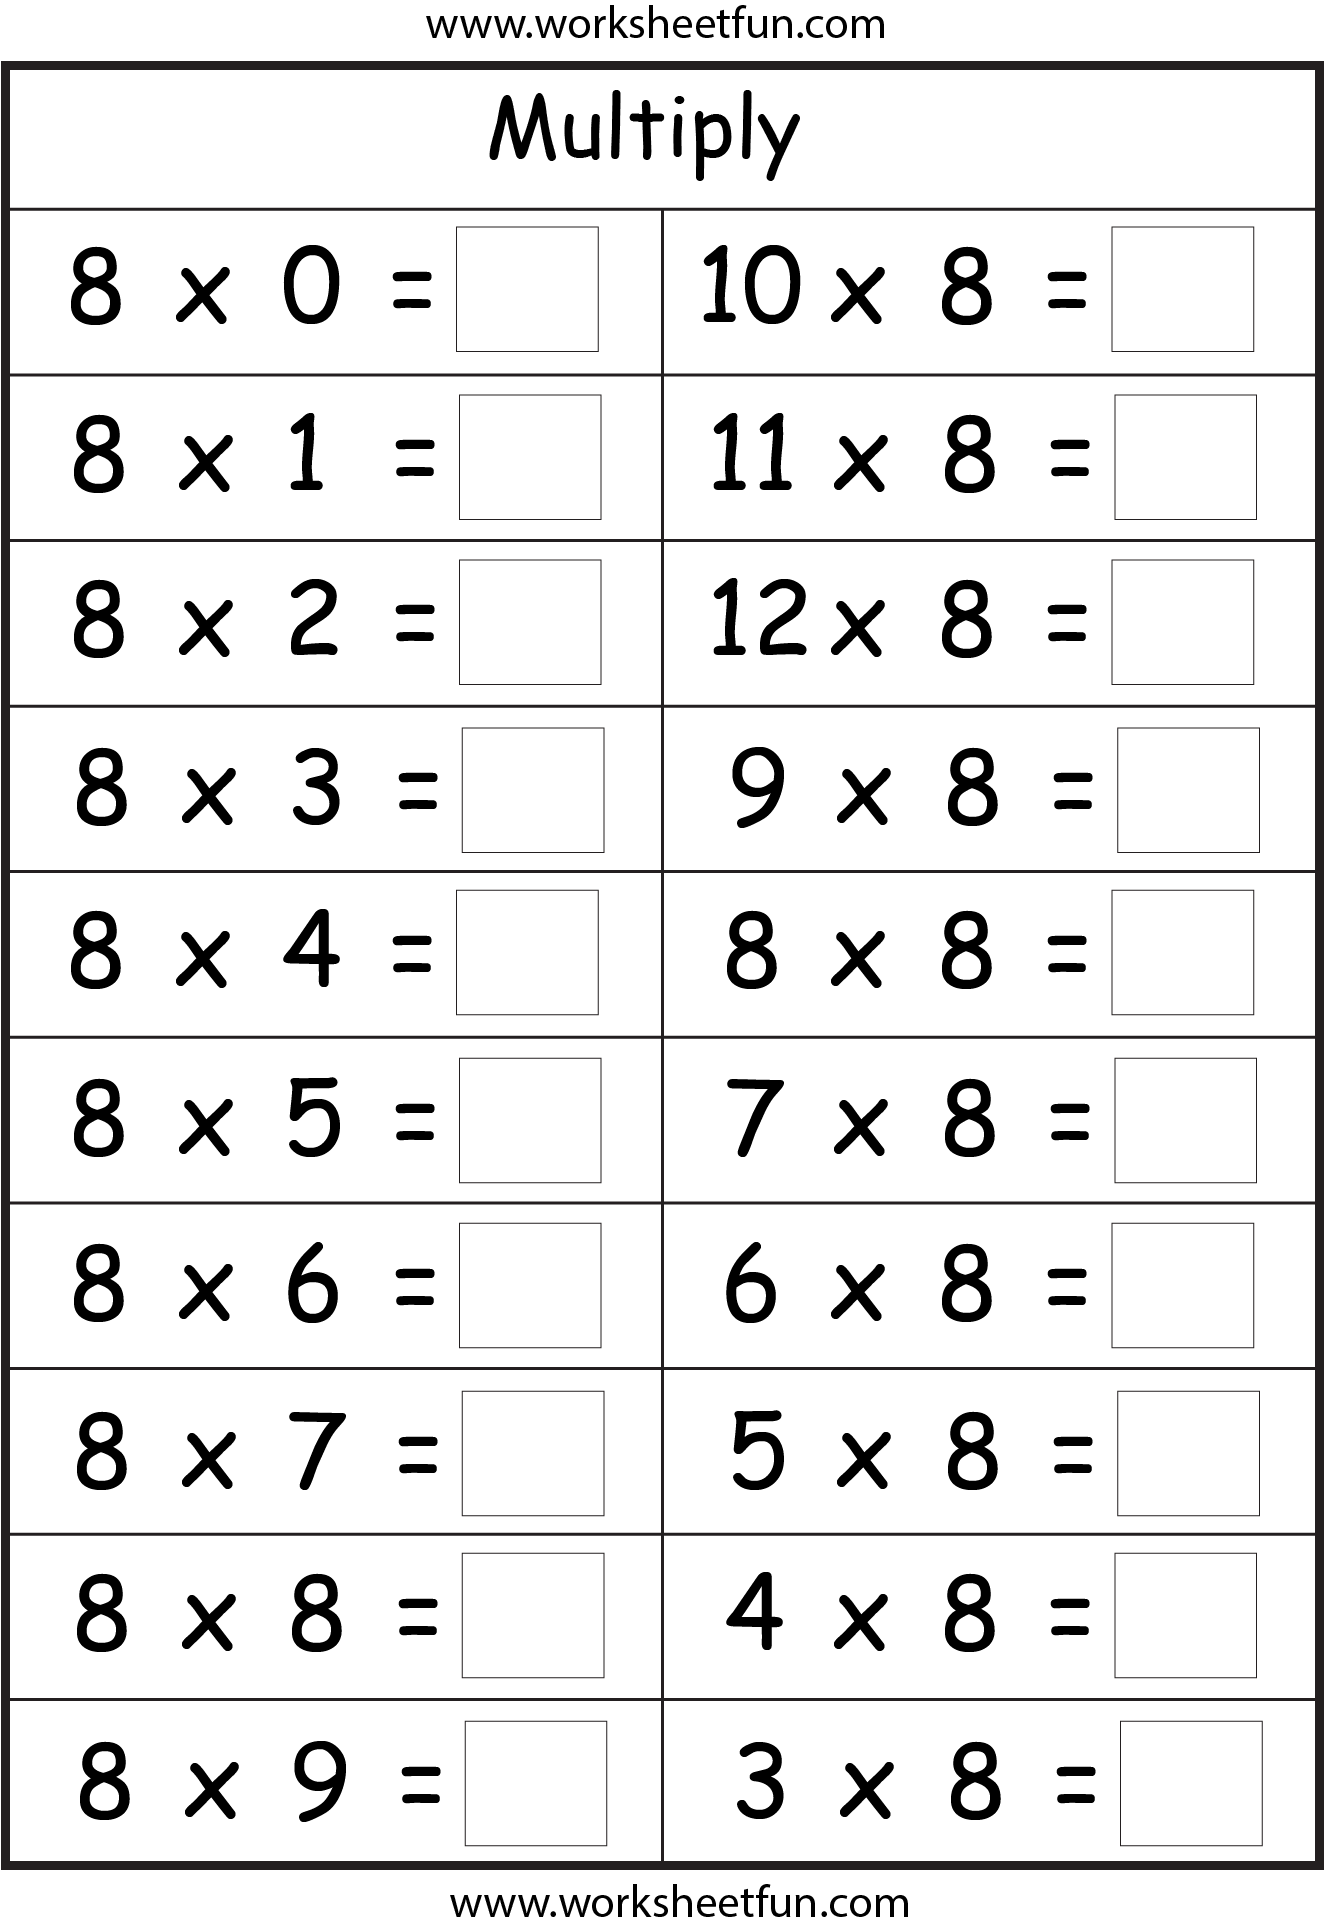  Multiplication Basic Facts 2 3 4 5 6 7 8 9 Times Tables Eight Worksheets FREE 